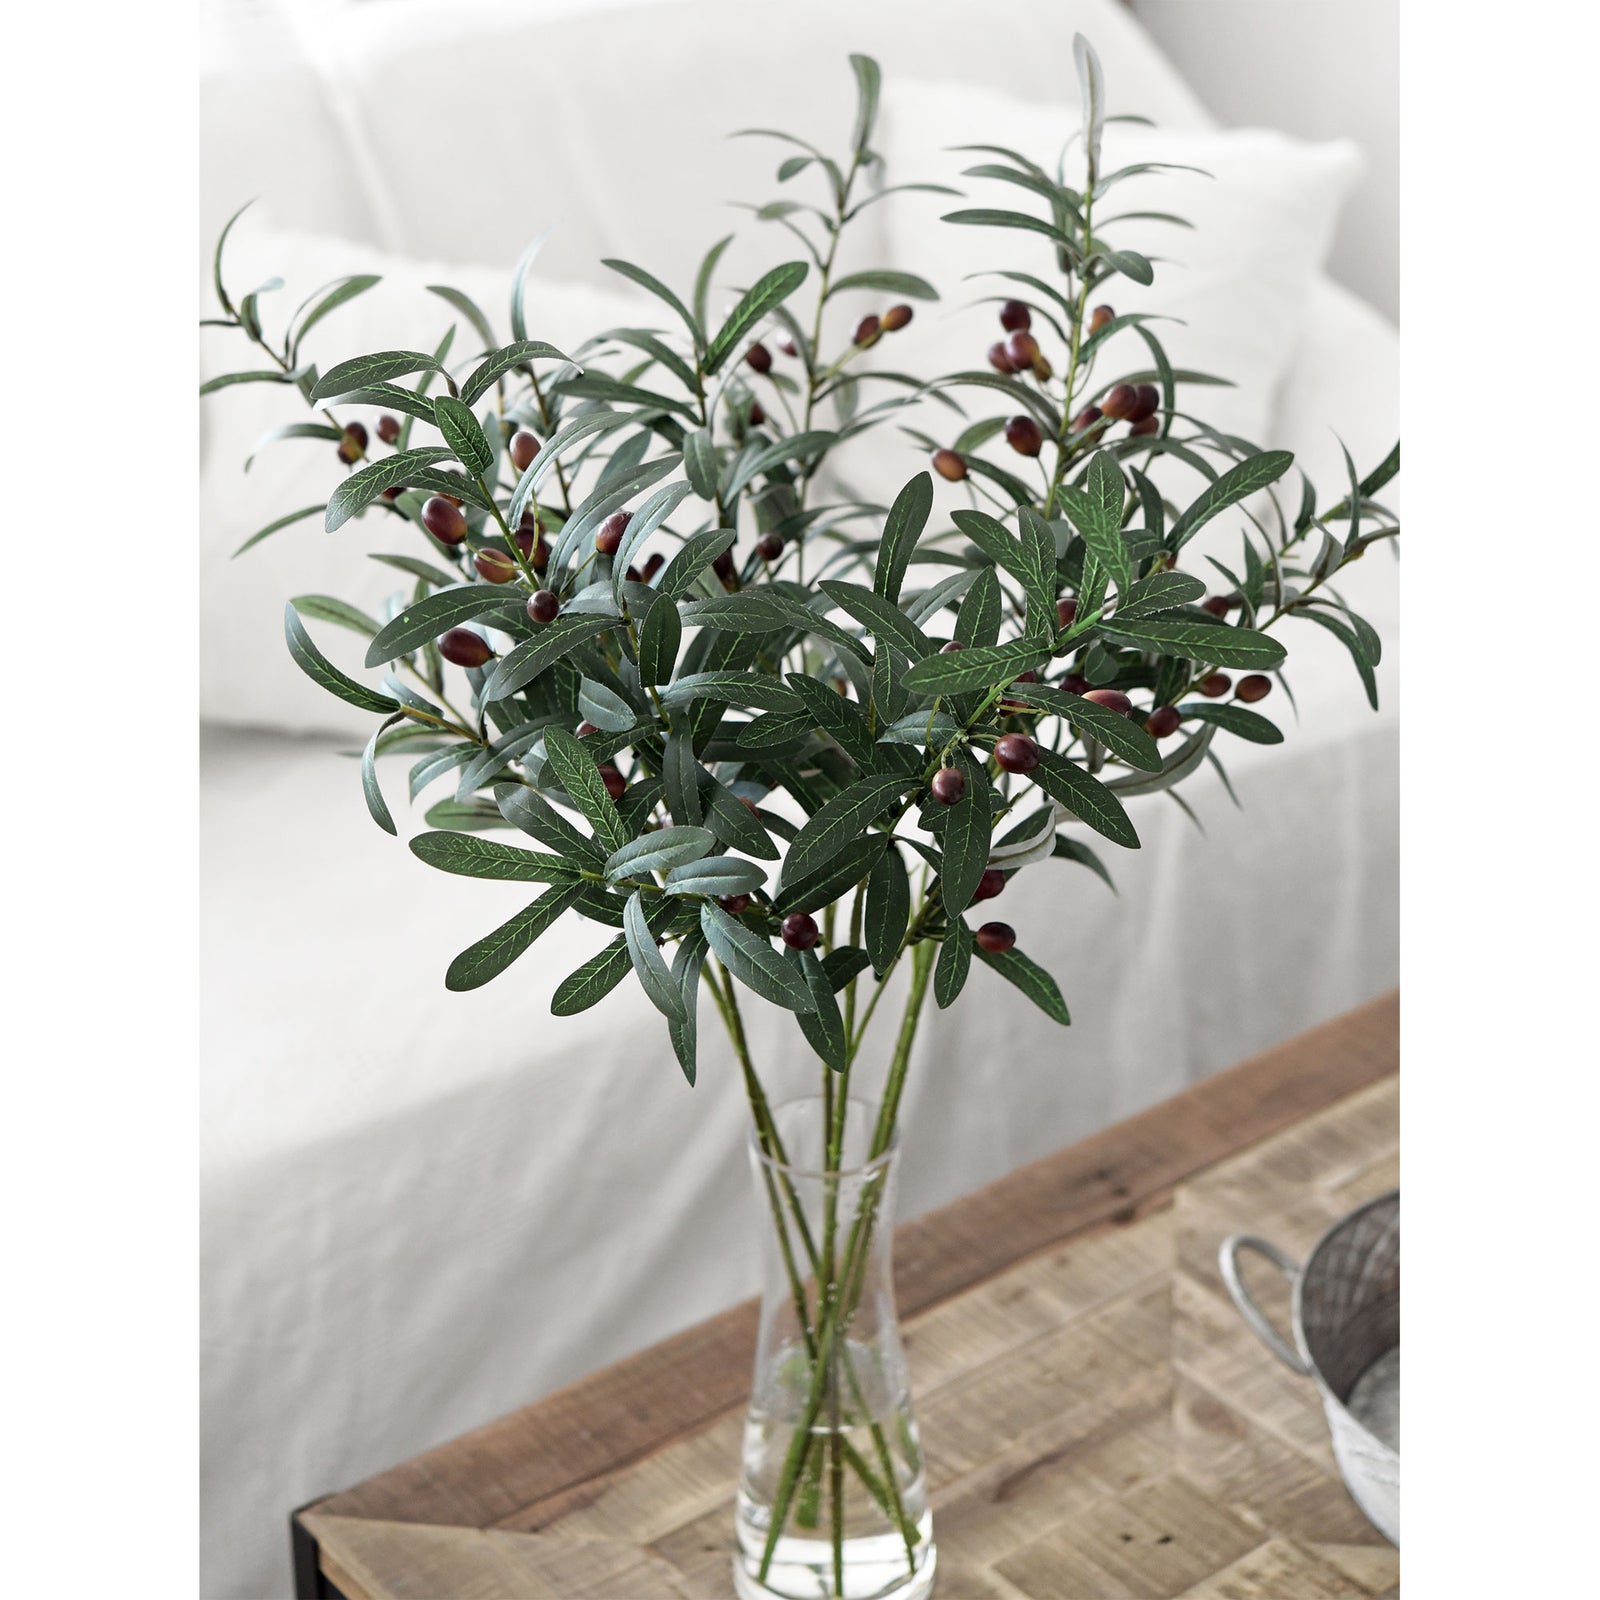 Wholesale Flowers, Olive Branches